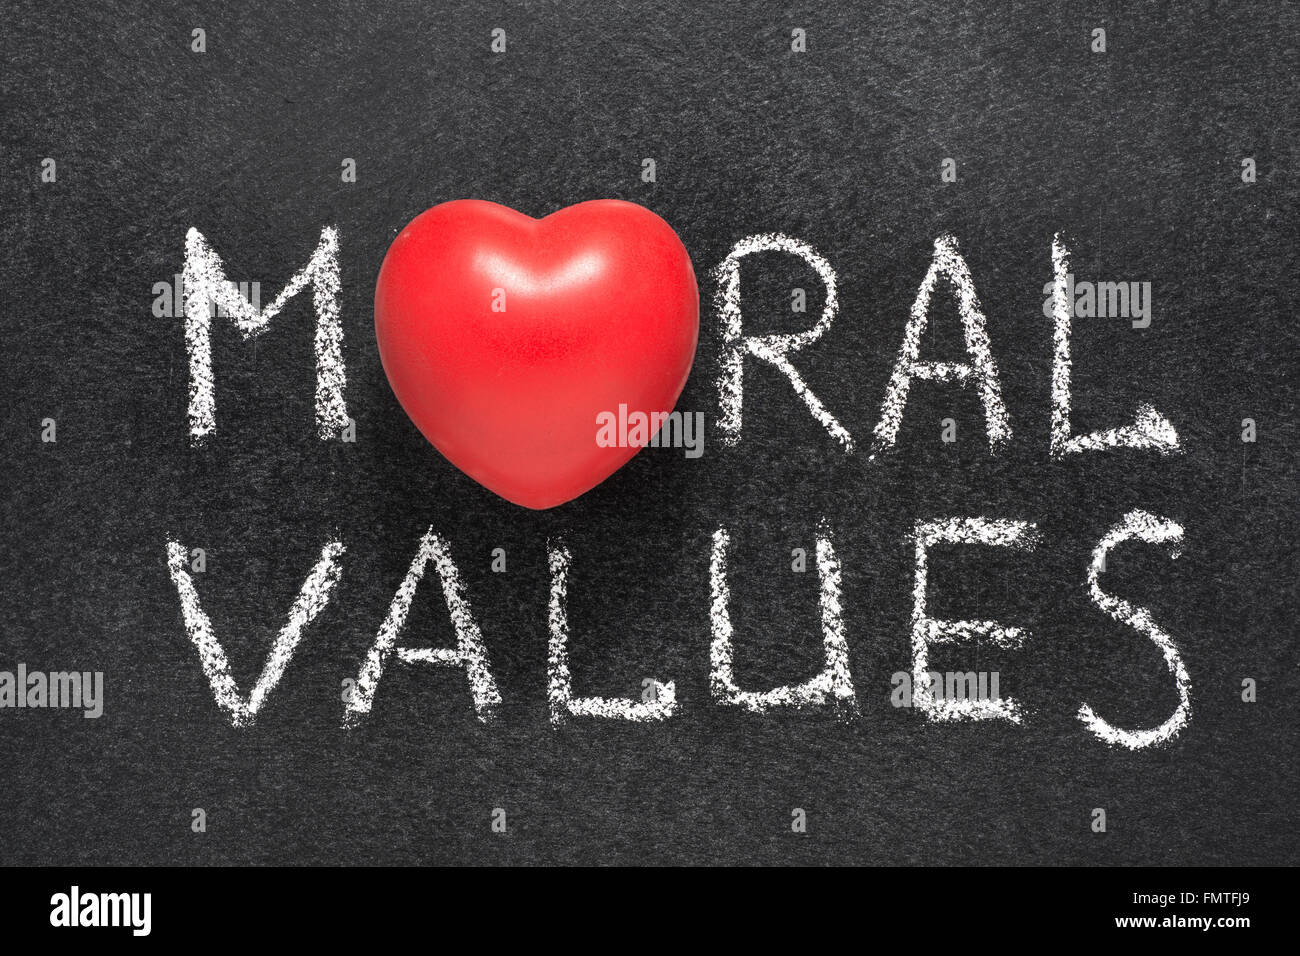 Share 120+ moral values drawing images